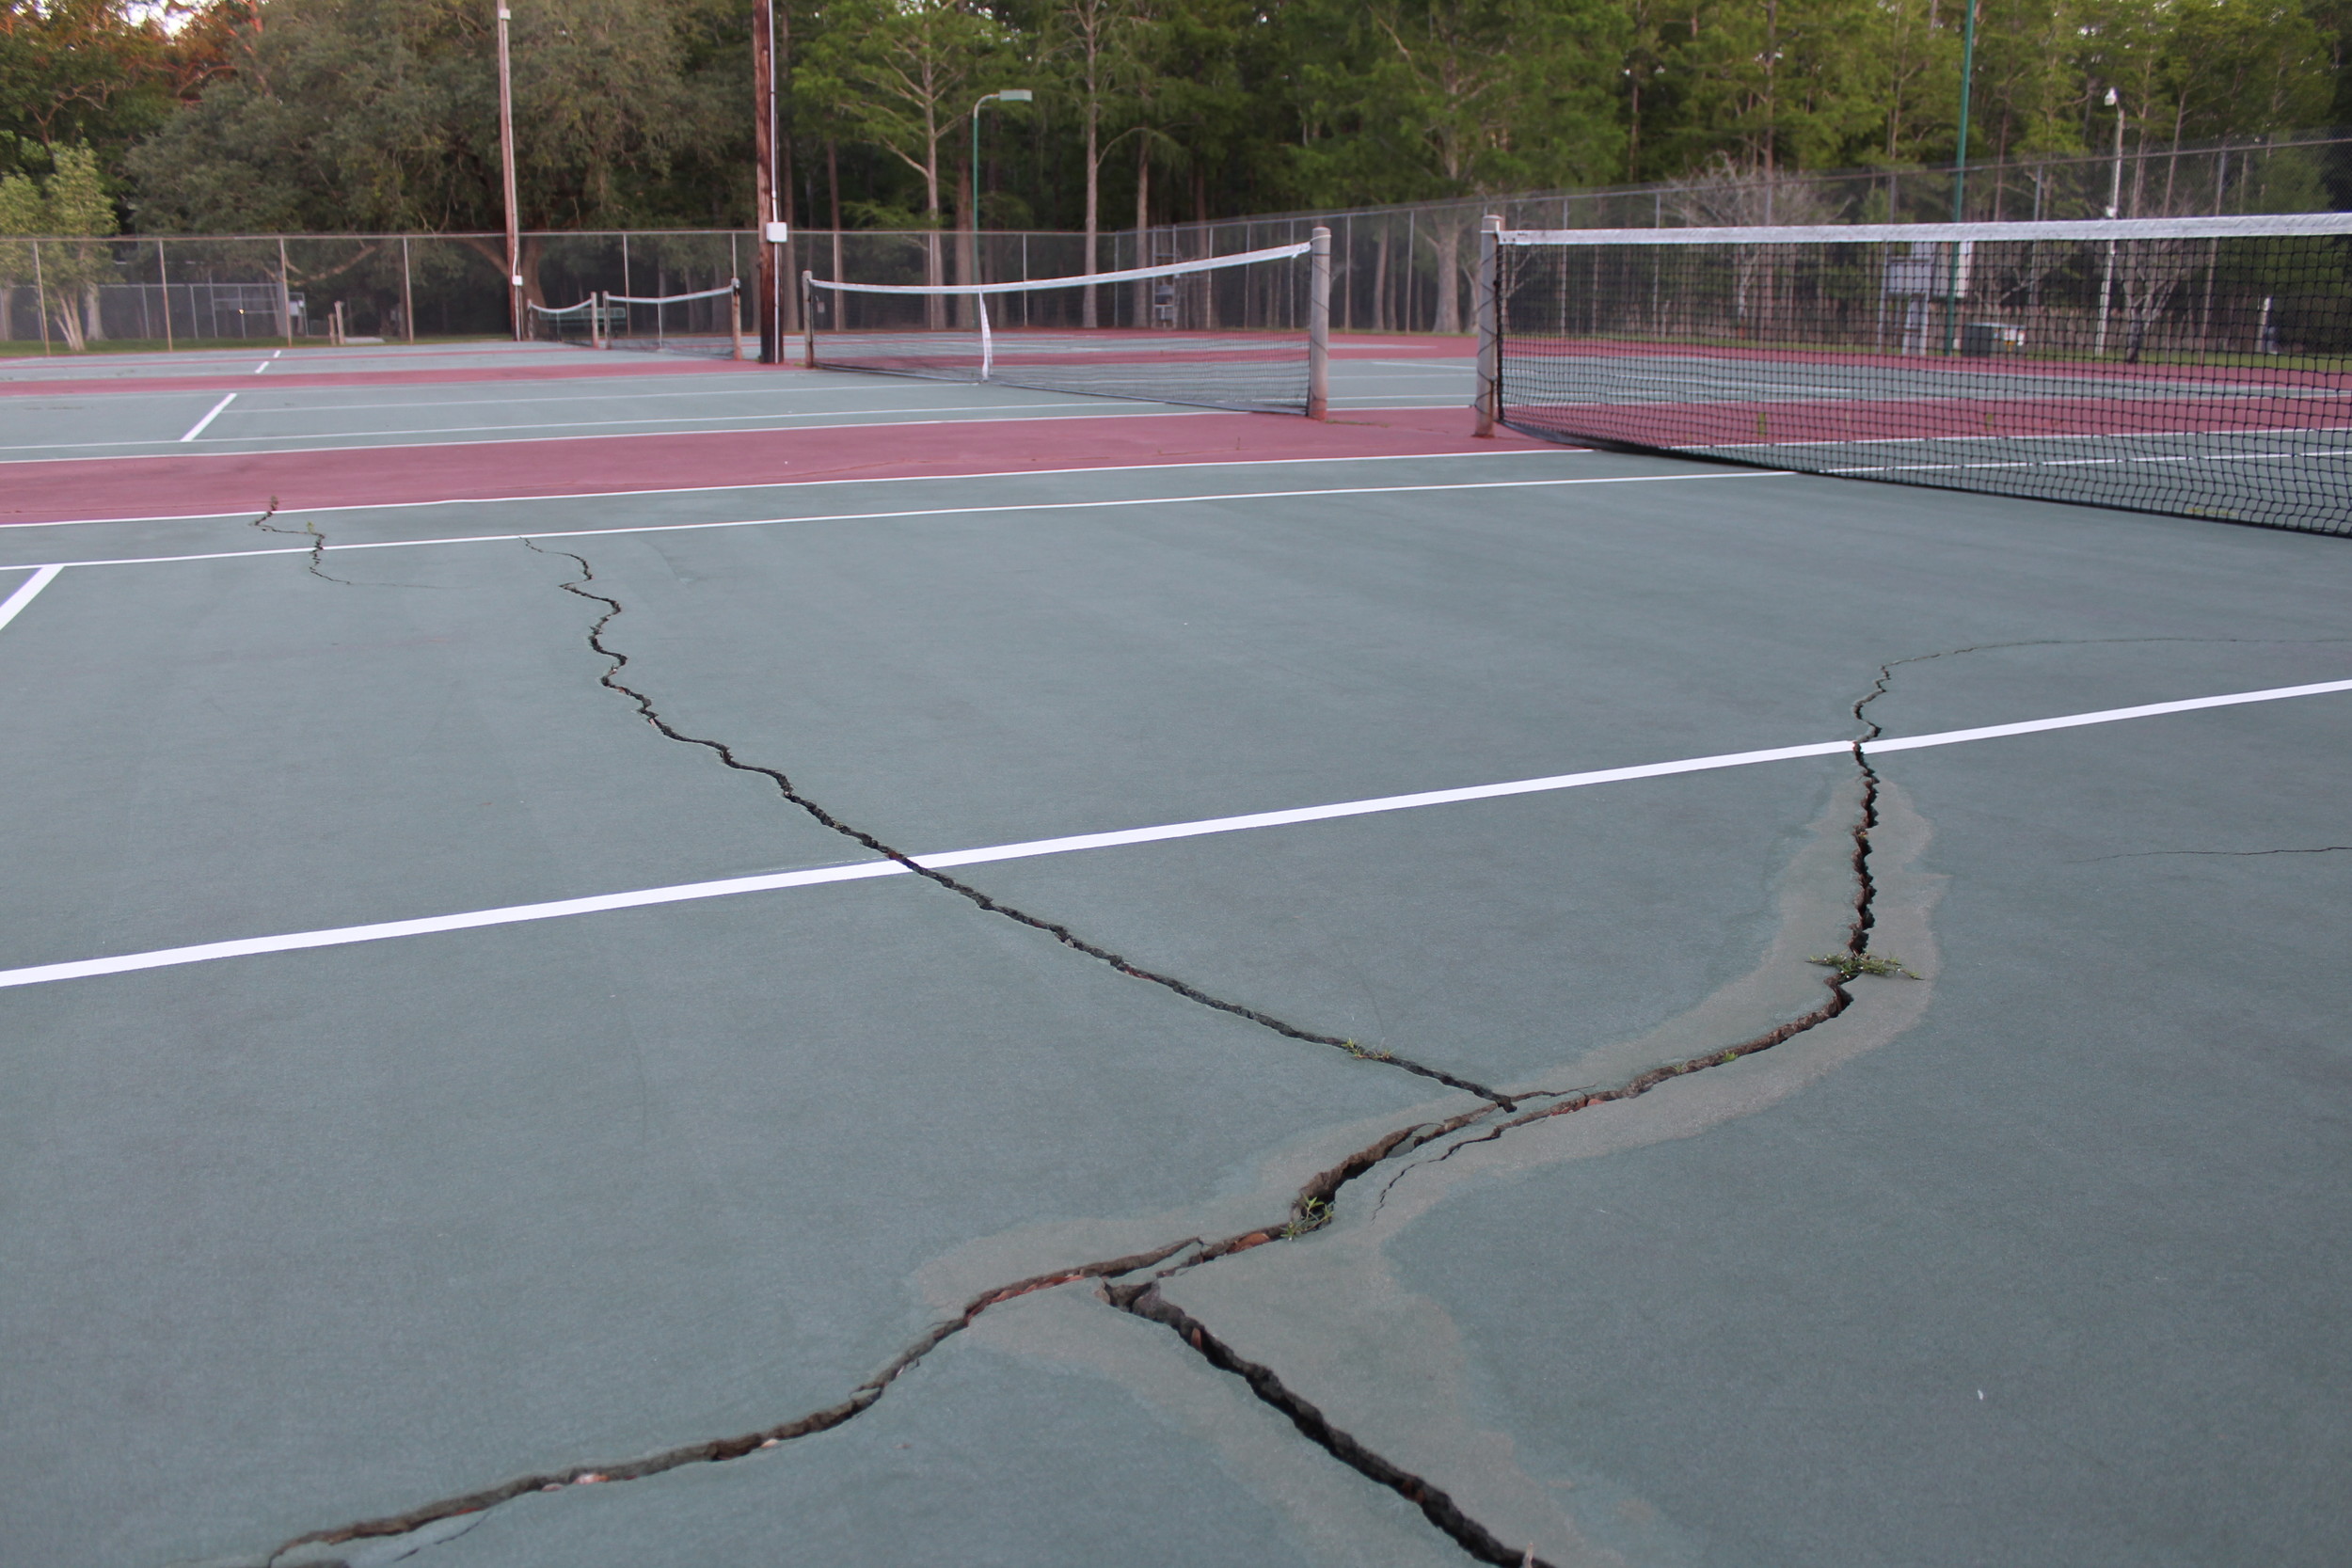 The current state of the tennis courts in Foley is so hazardous that the Foley High School tennis team was forced to finish their season in Gulf Shores.